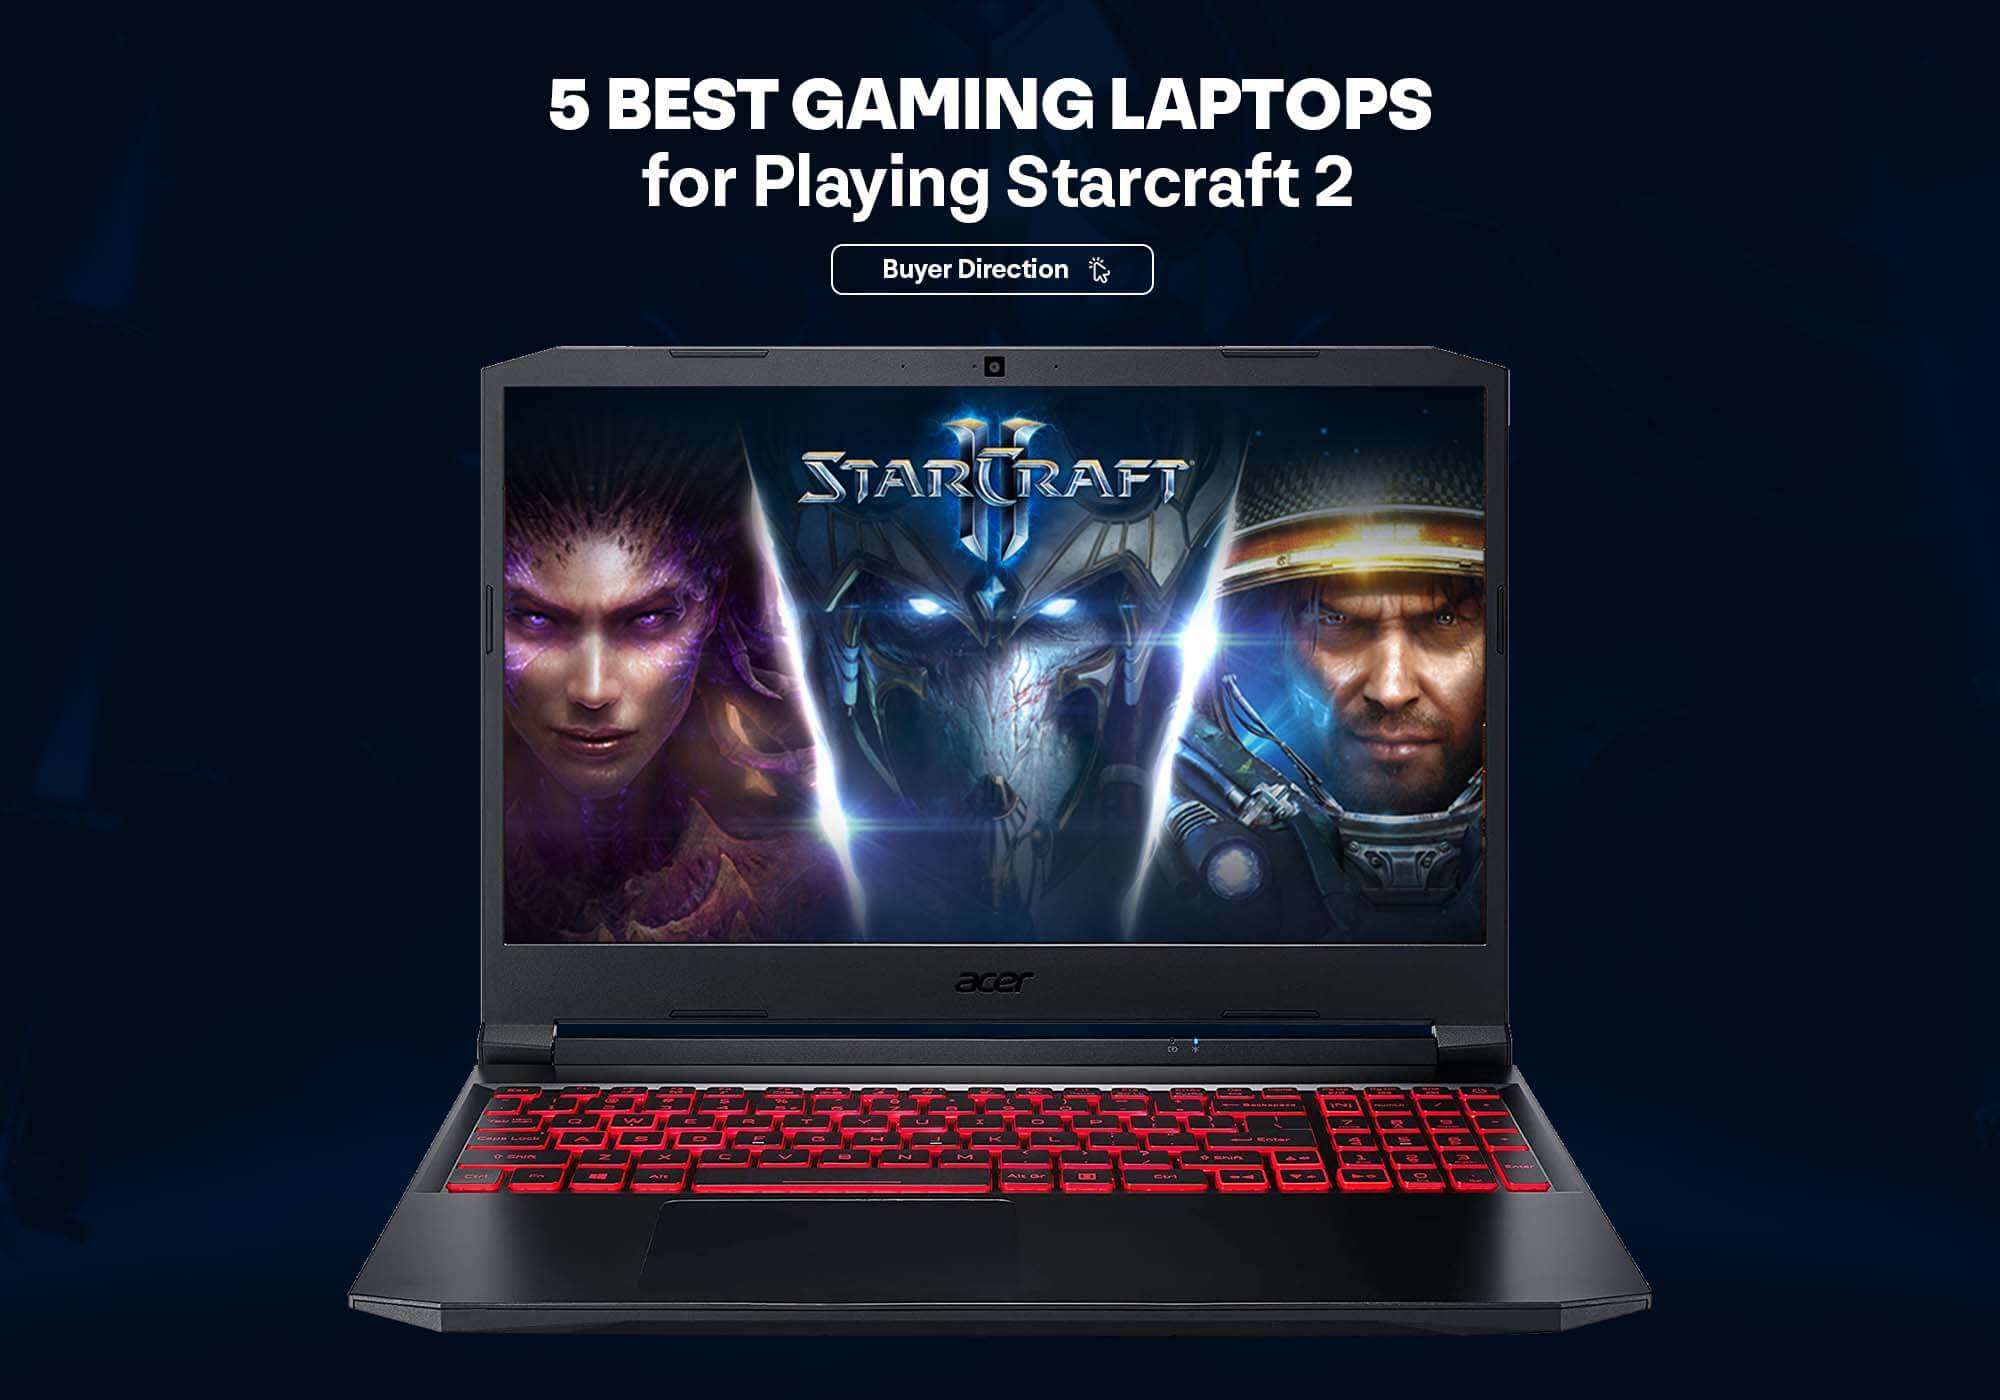 5 Best Gaming Laptops for Playing Starcraft 2